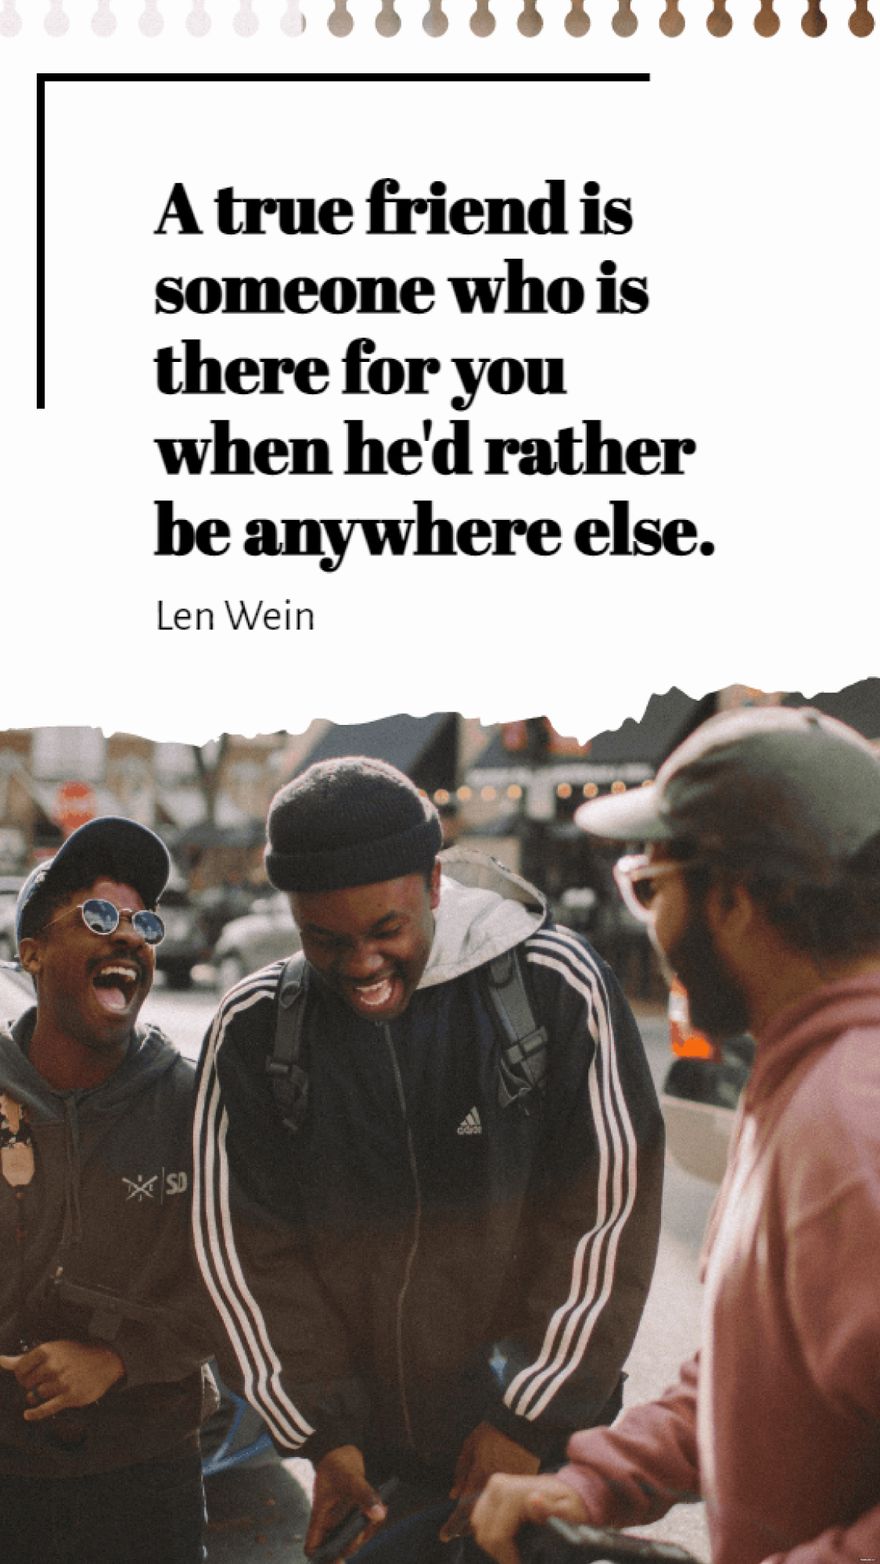 Len Wein - A true friend is someone who is there for you when he'd rather be anywhere else.